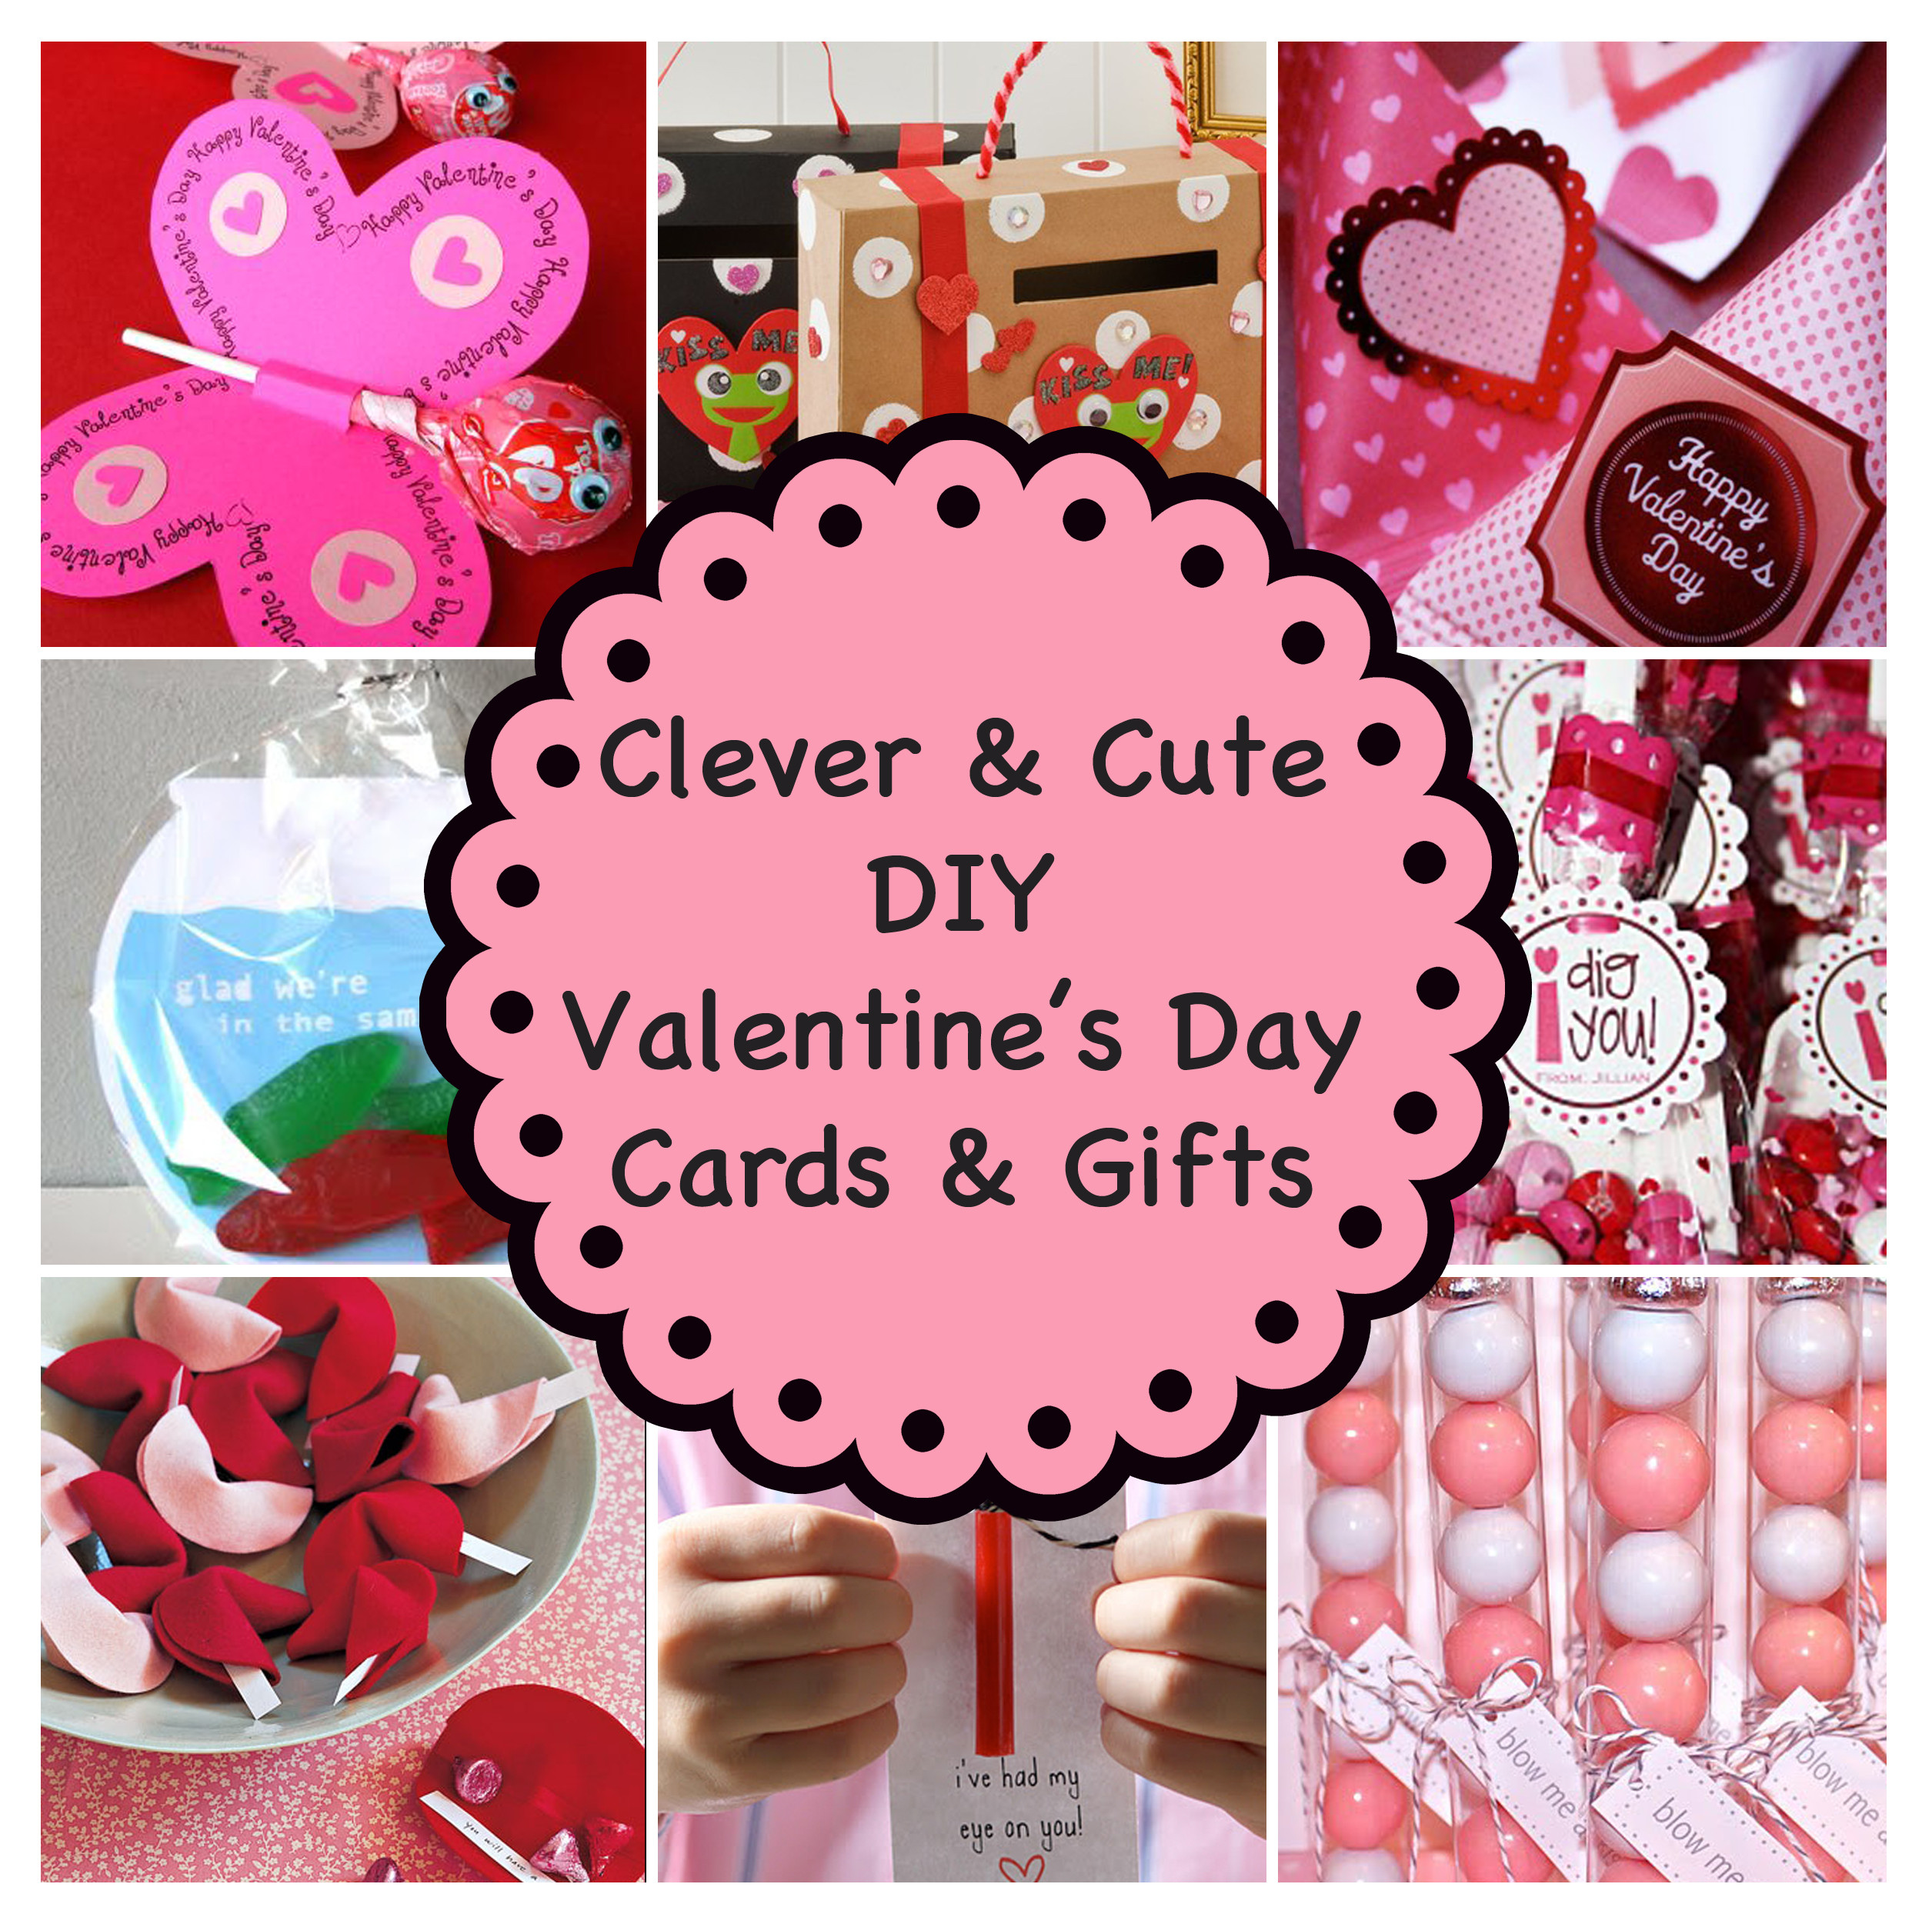 Cute Valentines Gift Ideas
 Clever and Cute DIY Valentine’s Day Cards & Gifts